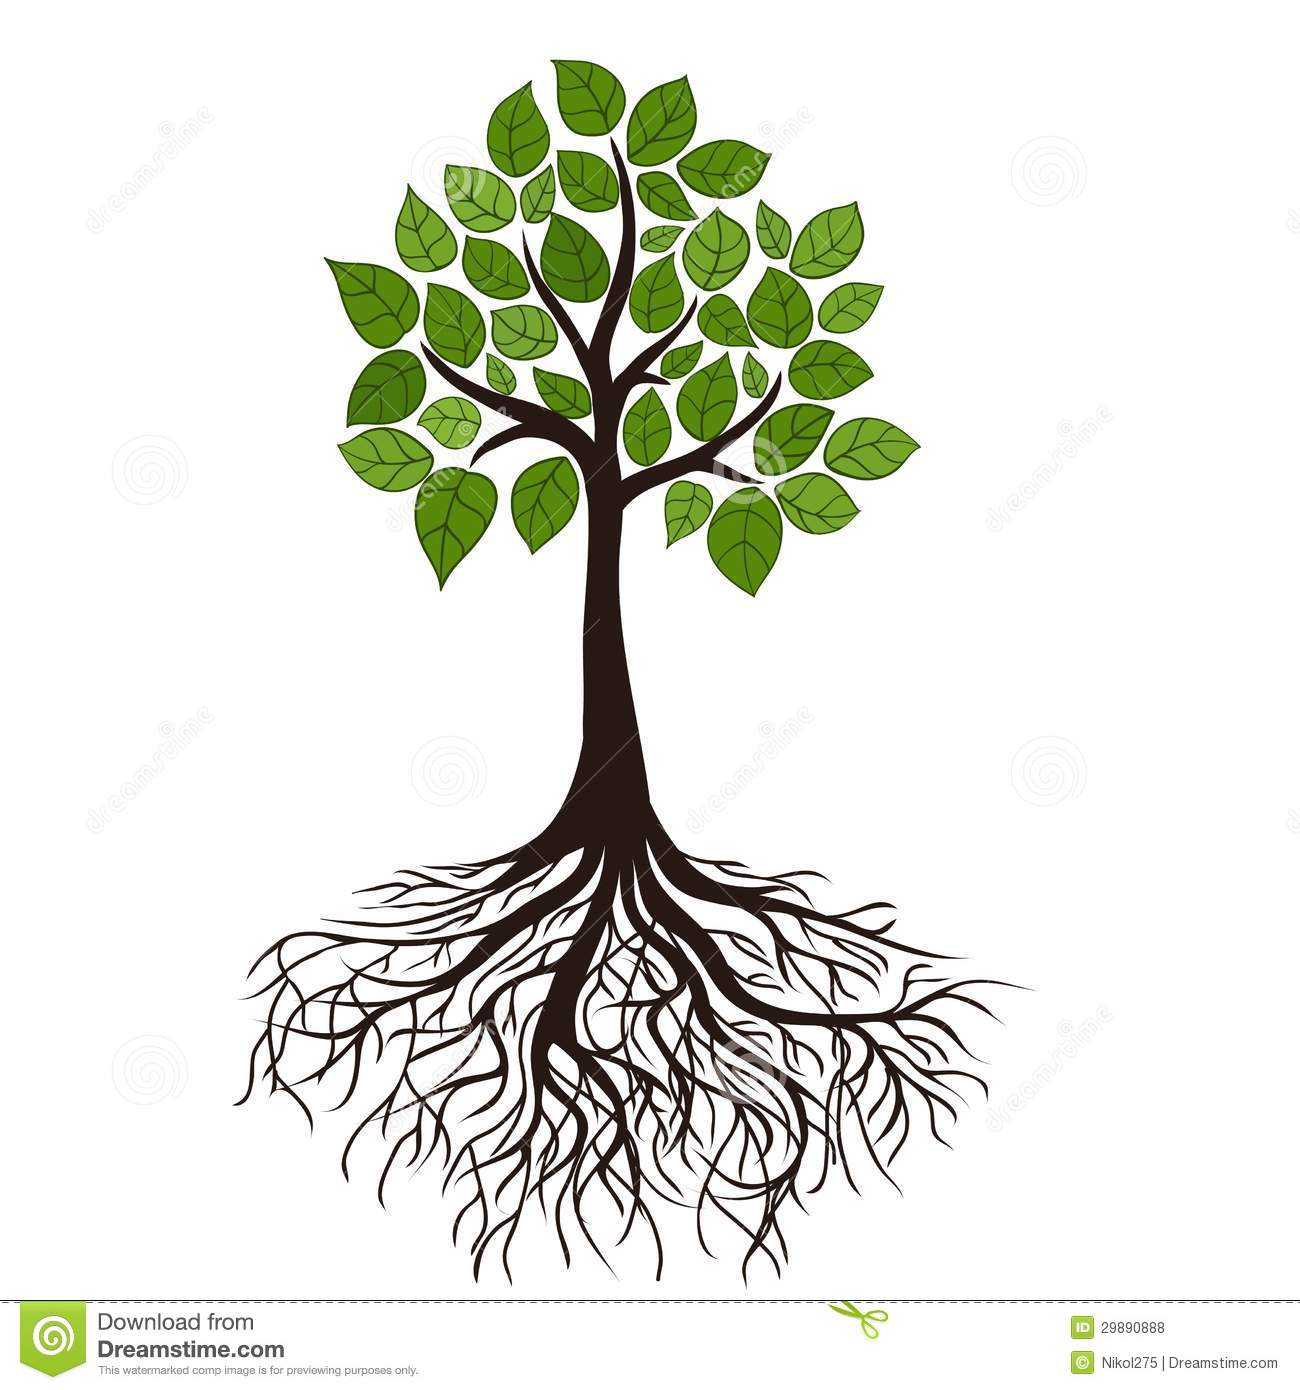 Tree With Roots Royalty Free Stock Photos   Image  29890888